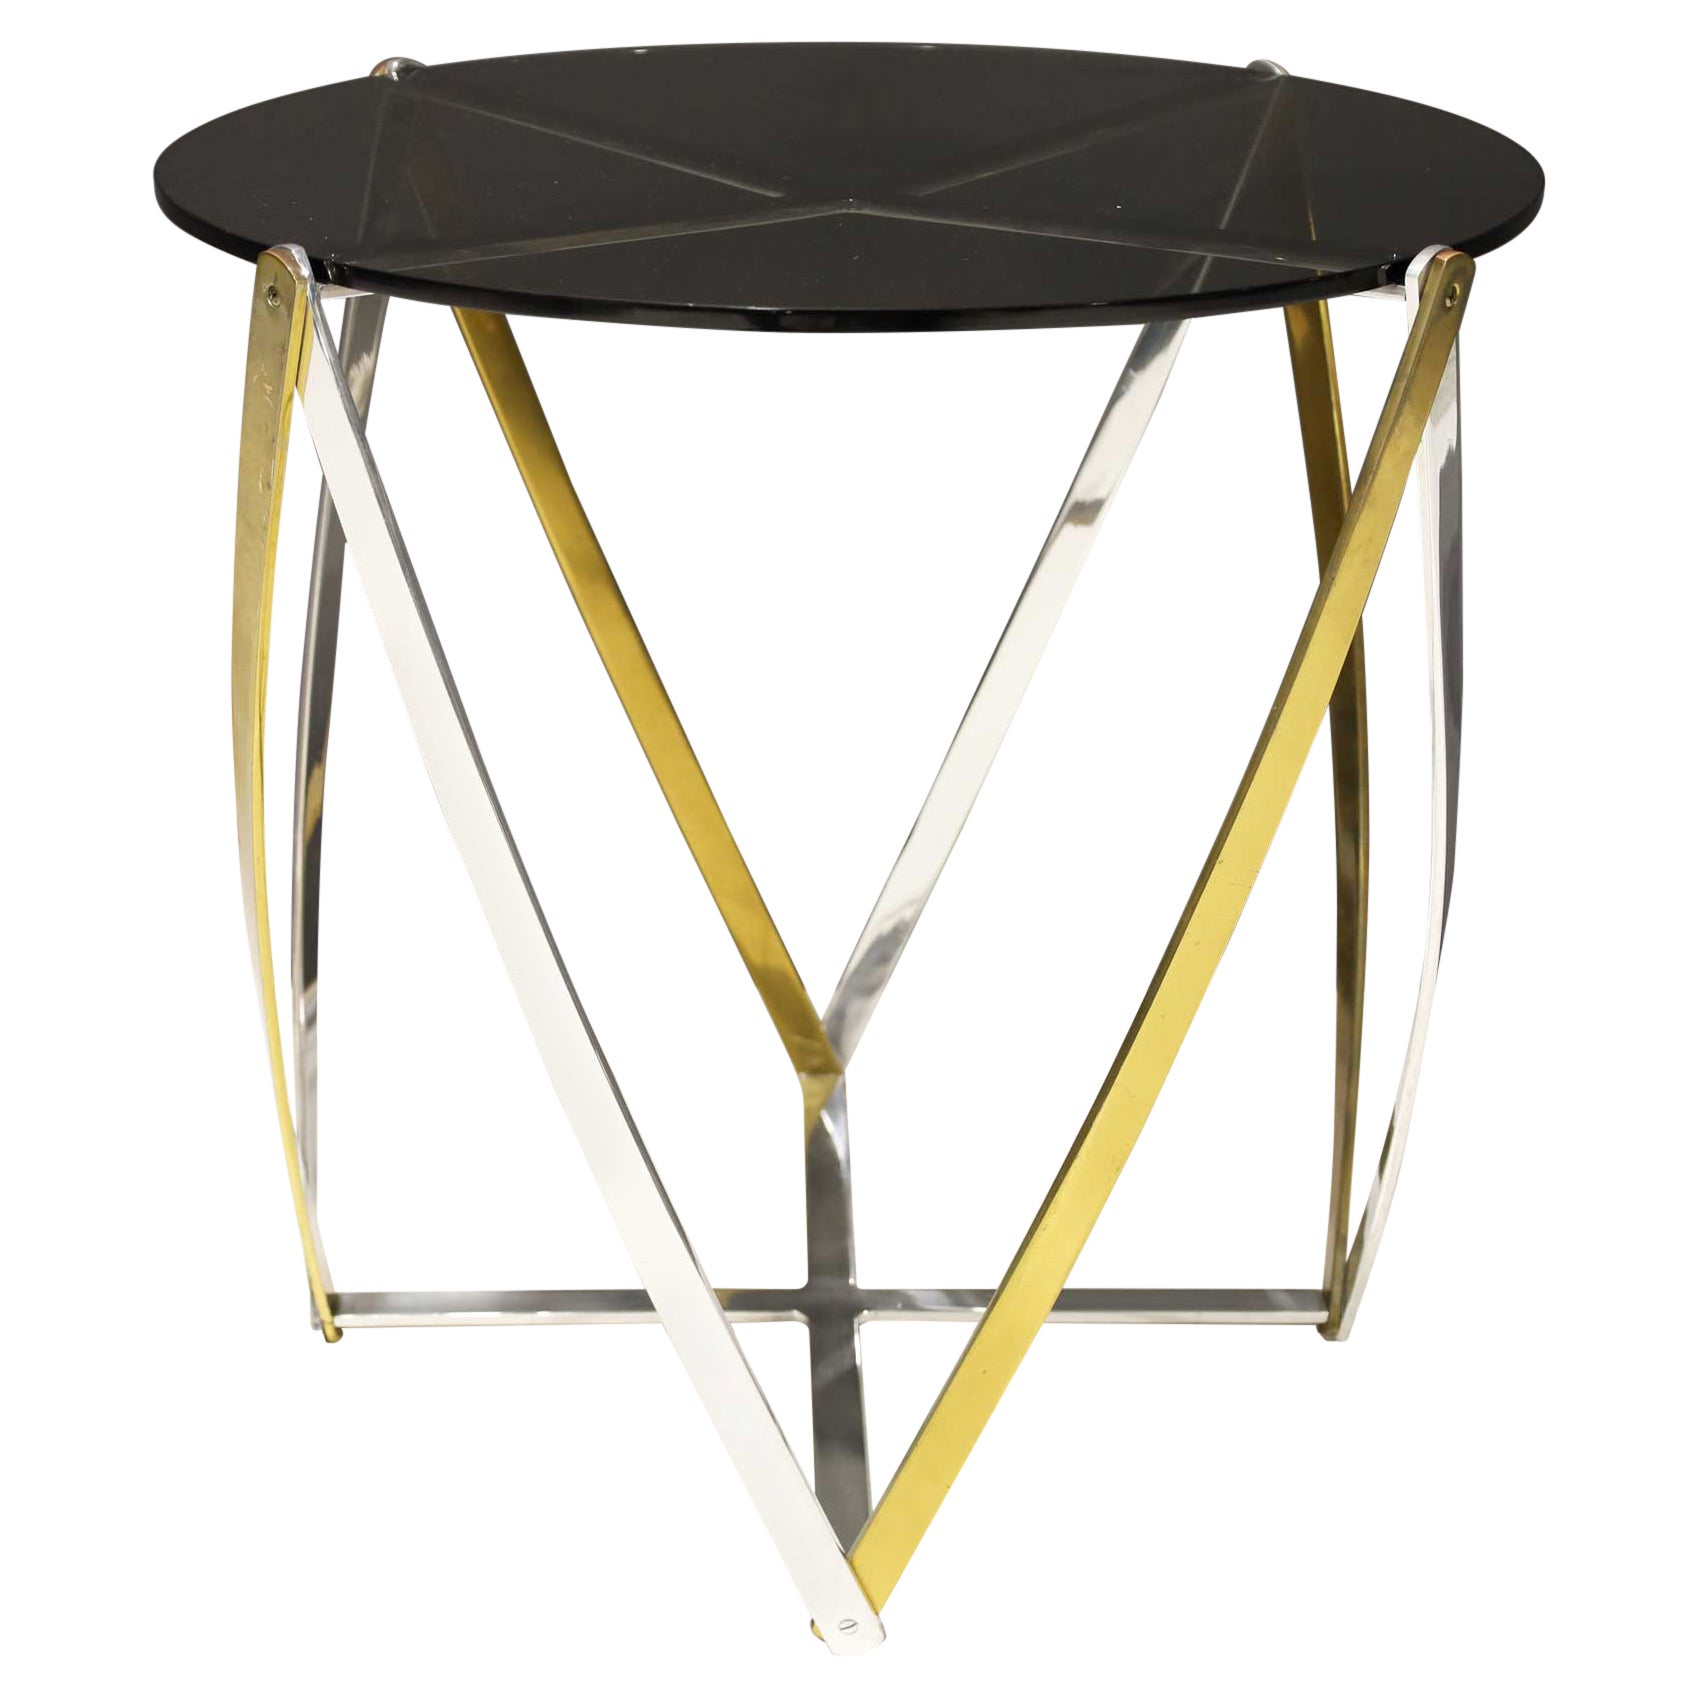 John Vesey Brass and Brushed Aluminum End Table 1970s, Smoked Glass Top For Sale